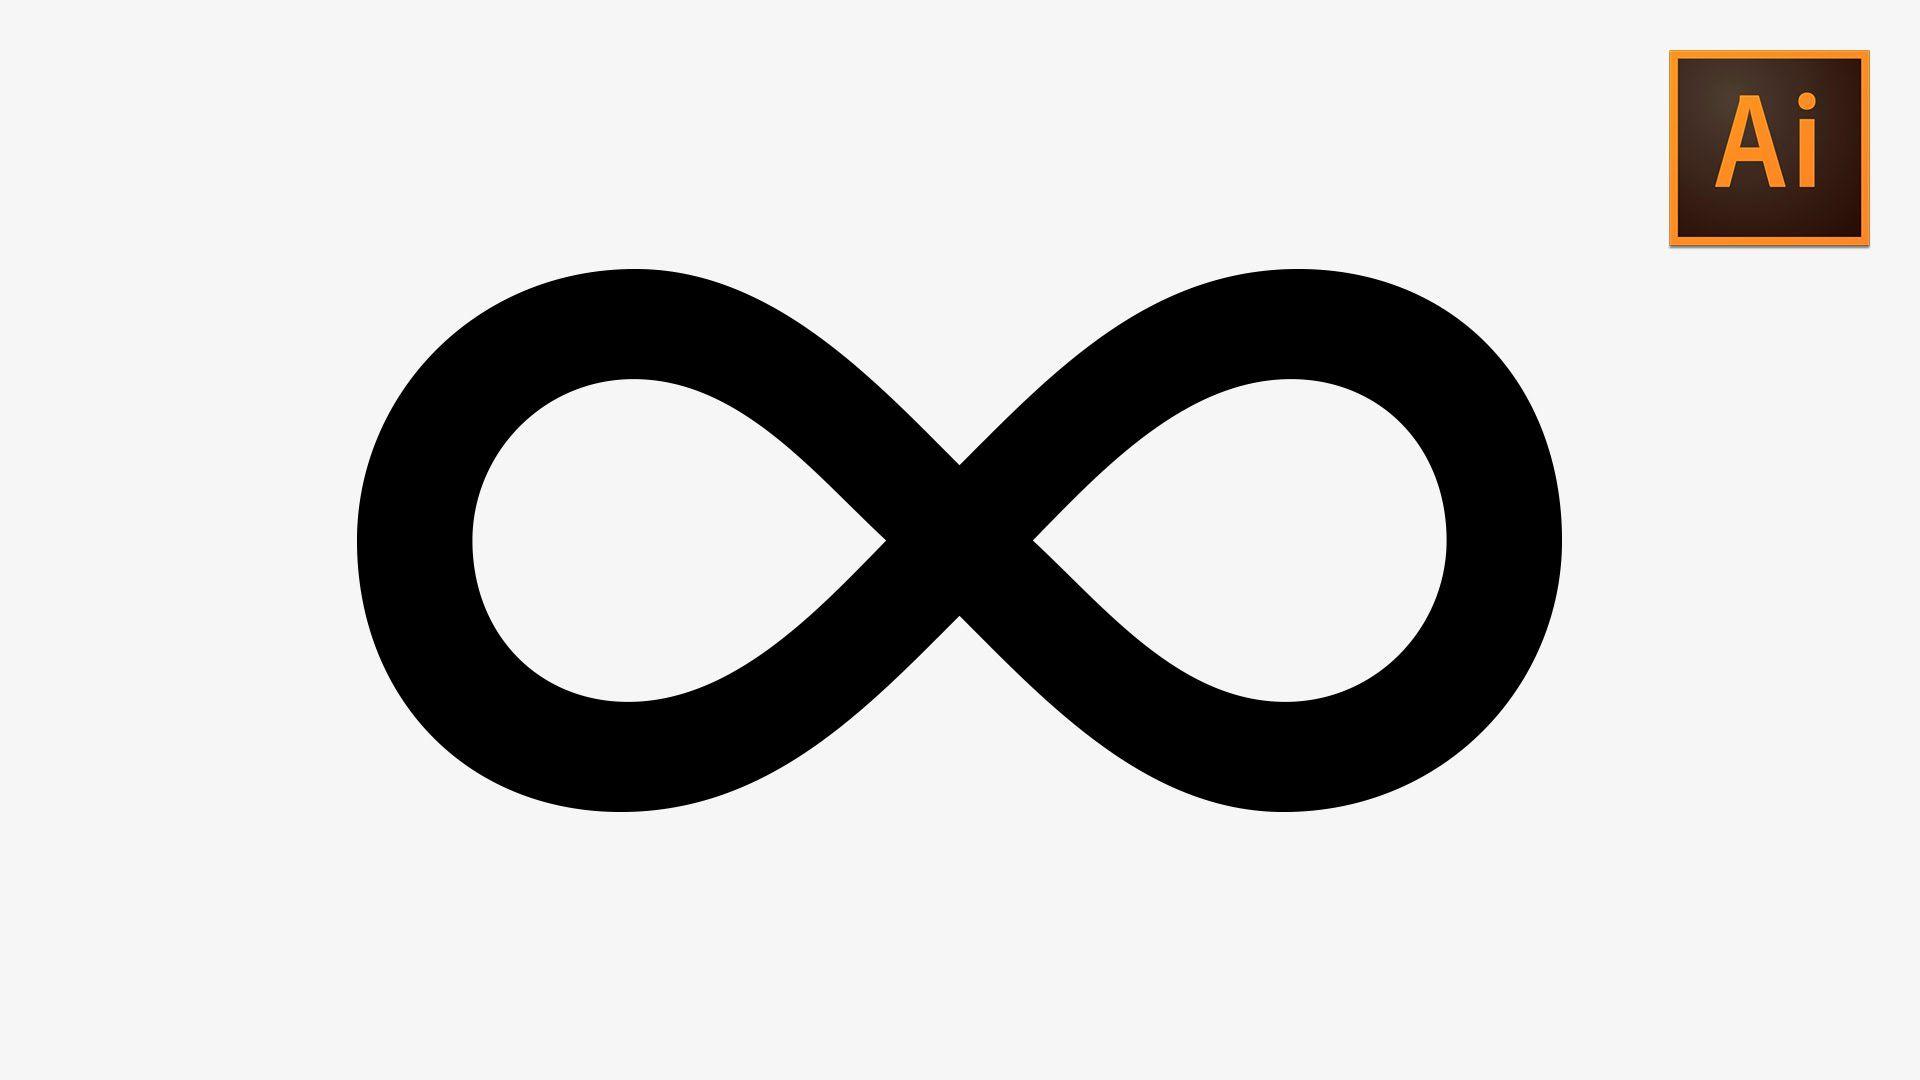 Youtube.com Logo - Learn How to Quickly Create an Infinity Symbol in Adobe Illustrator